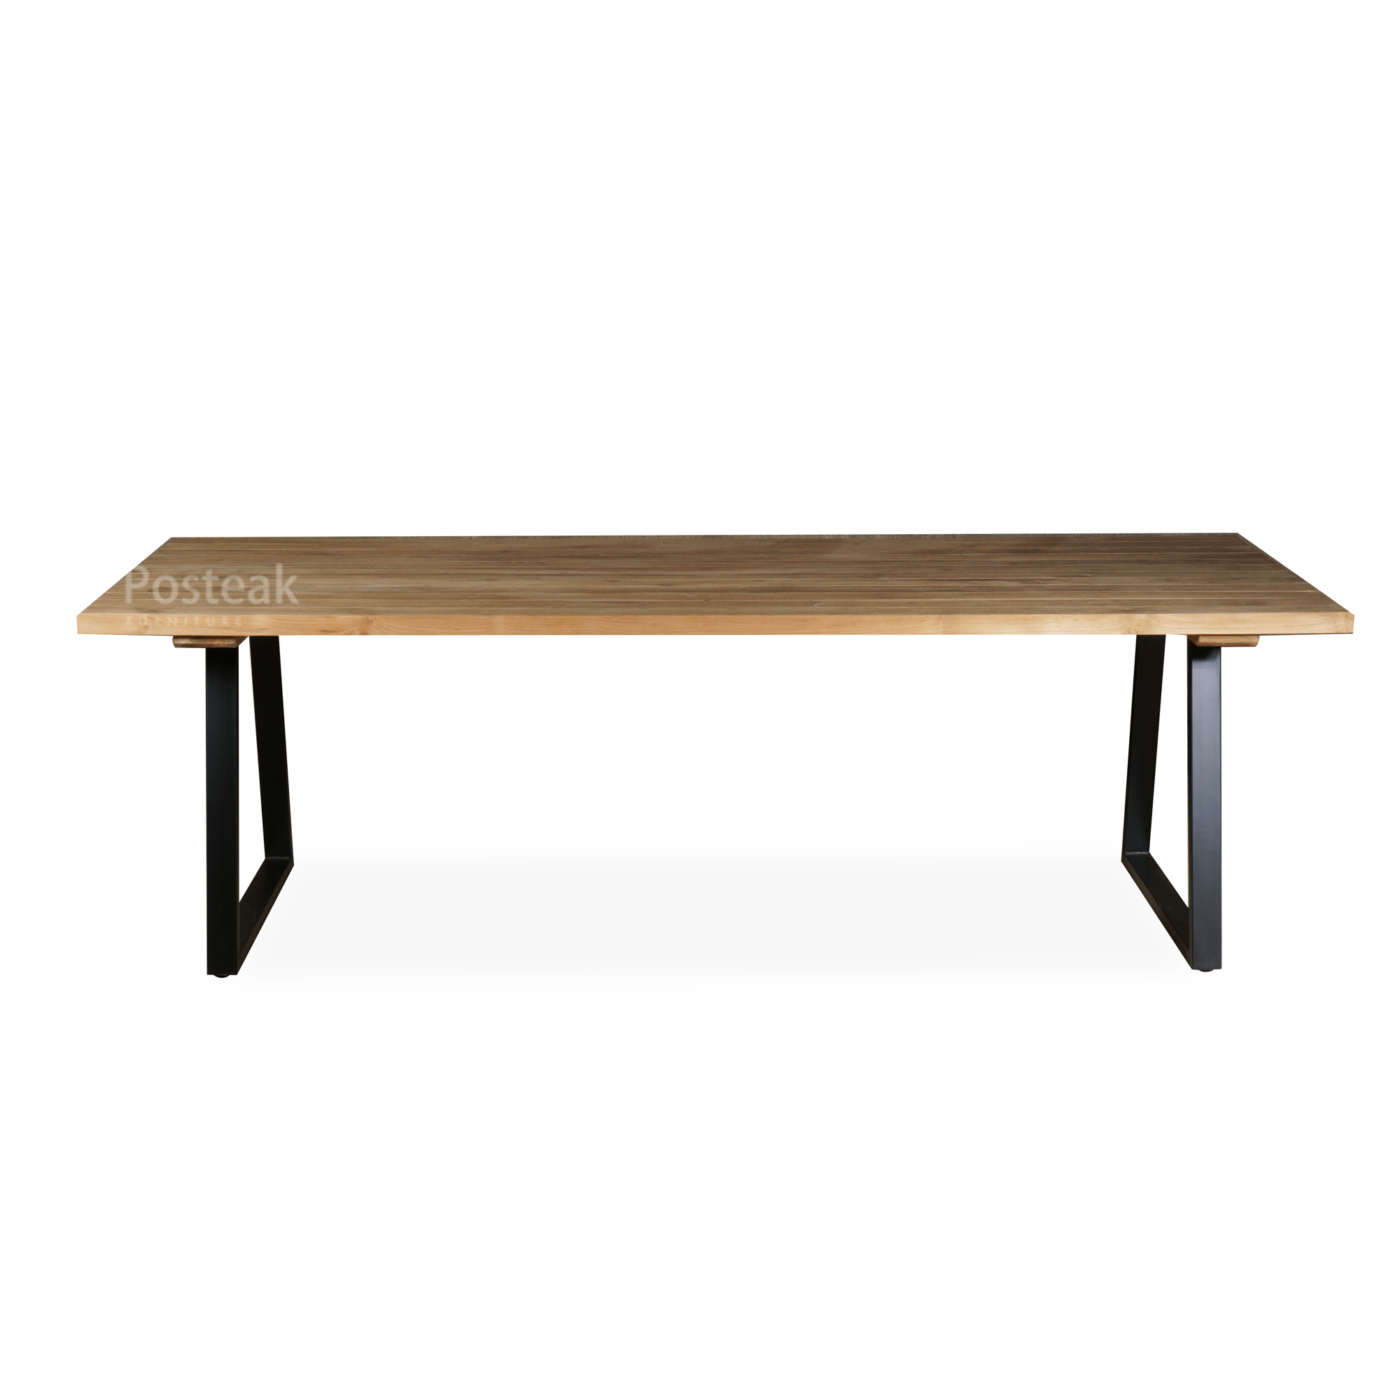 Covela-teak outdoor-dining-table-front